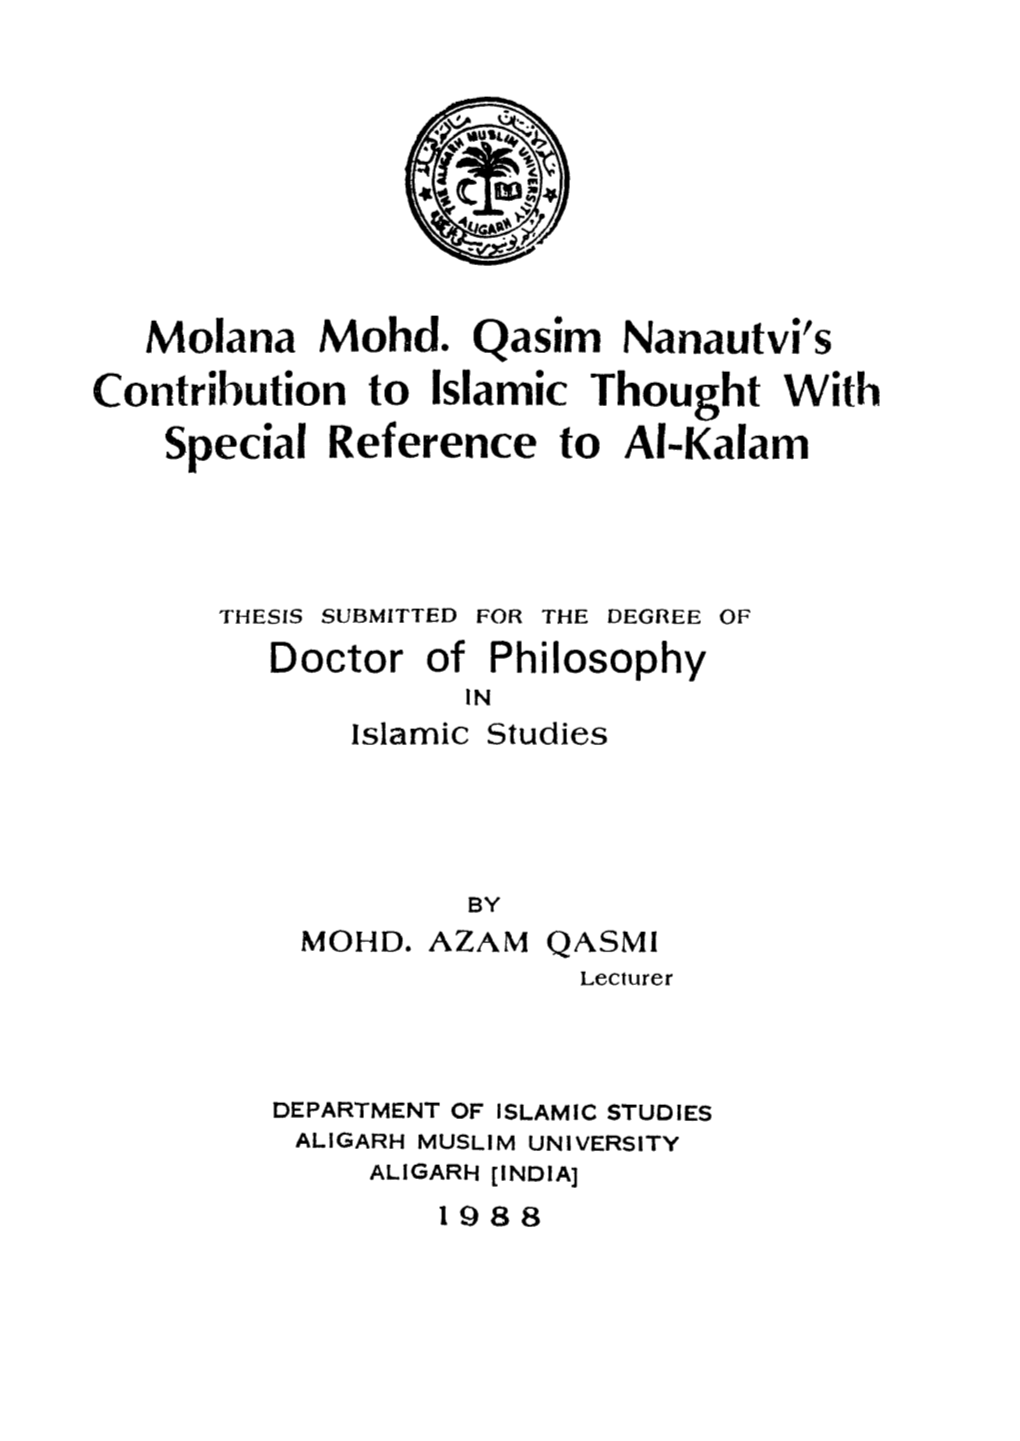 Molana Mohd. Qasim Nanautvi's Contribution to Islamic Thought with Special Reference to Al-Kalam